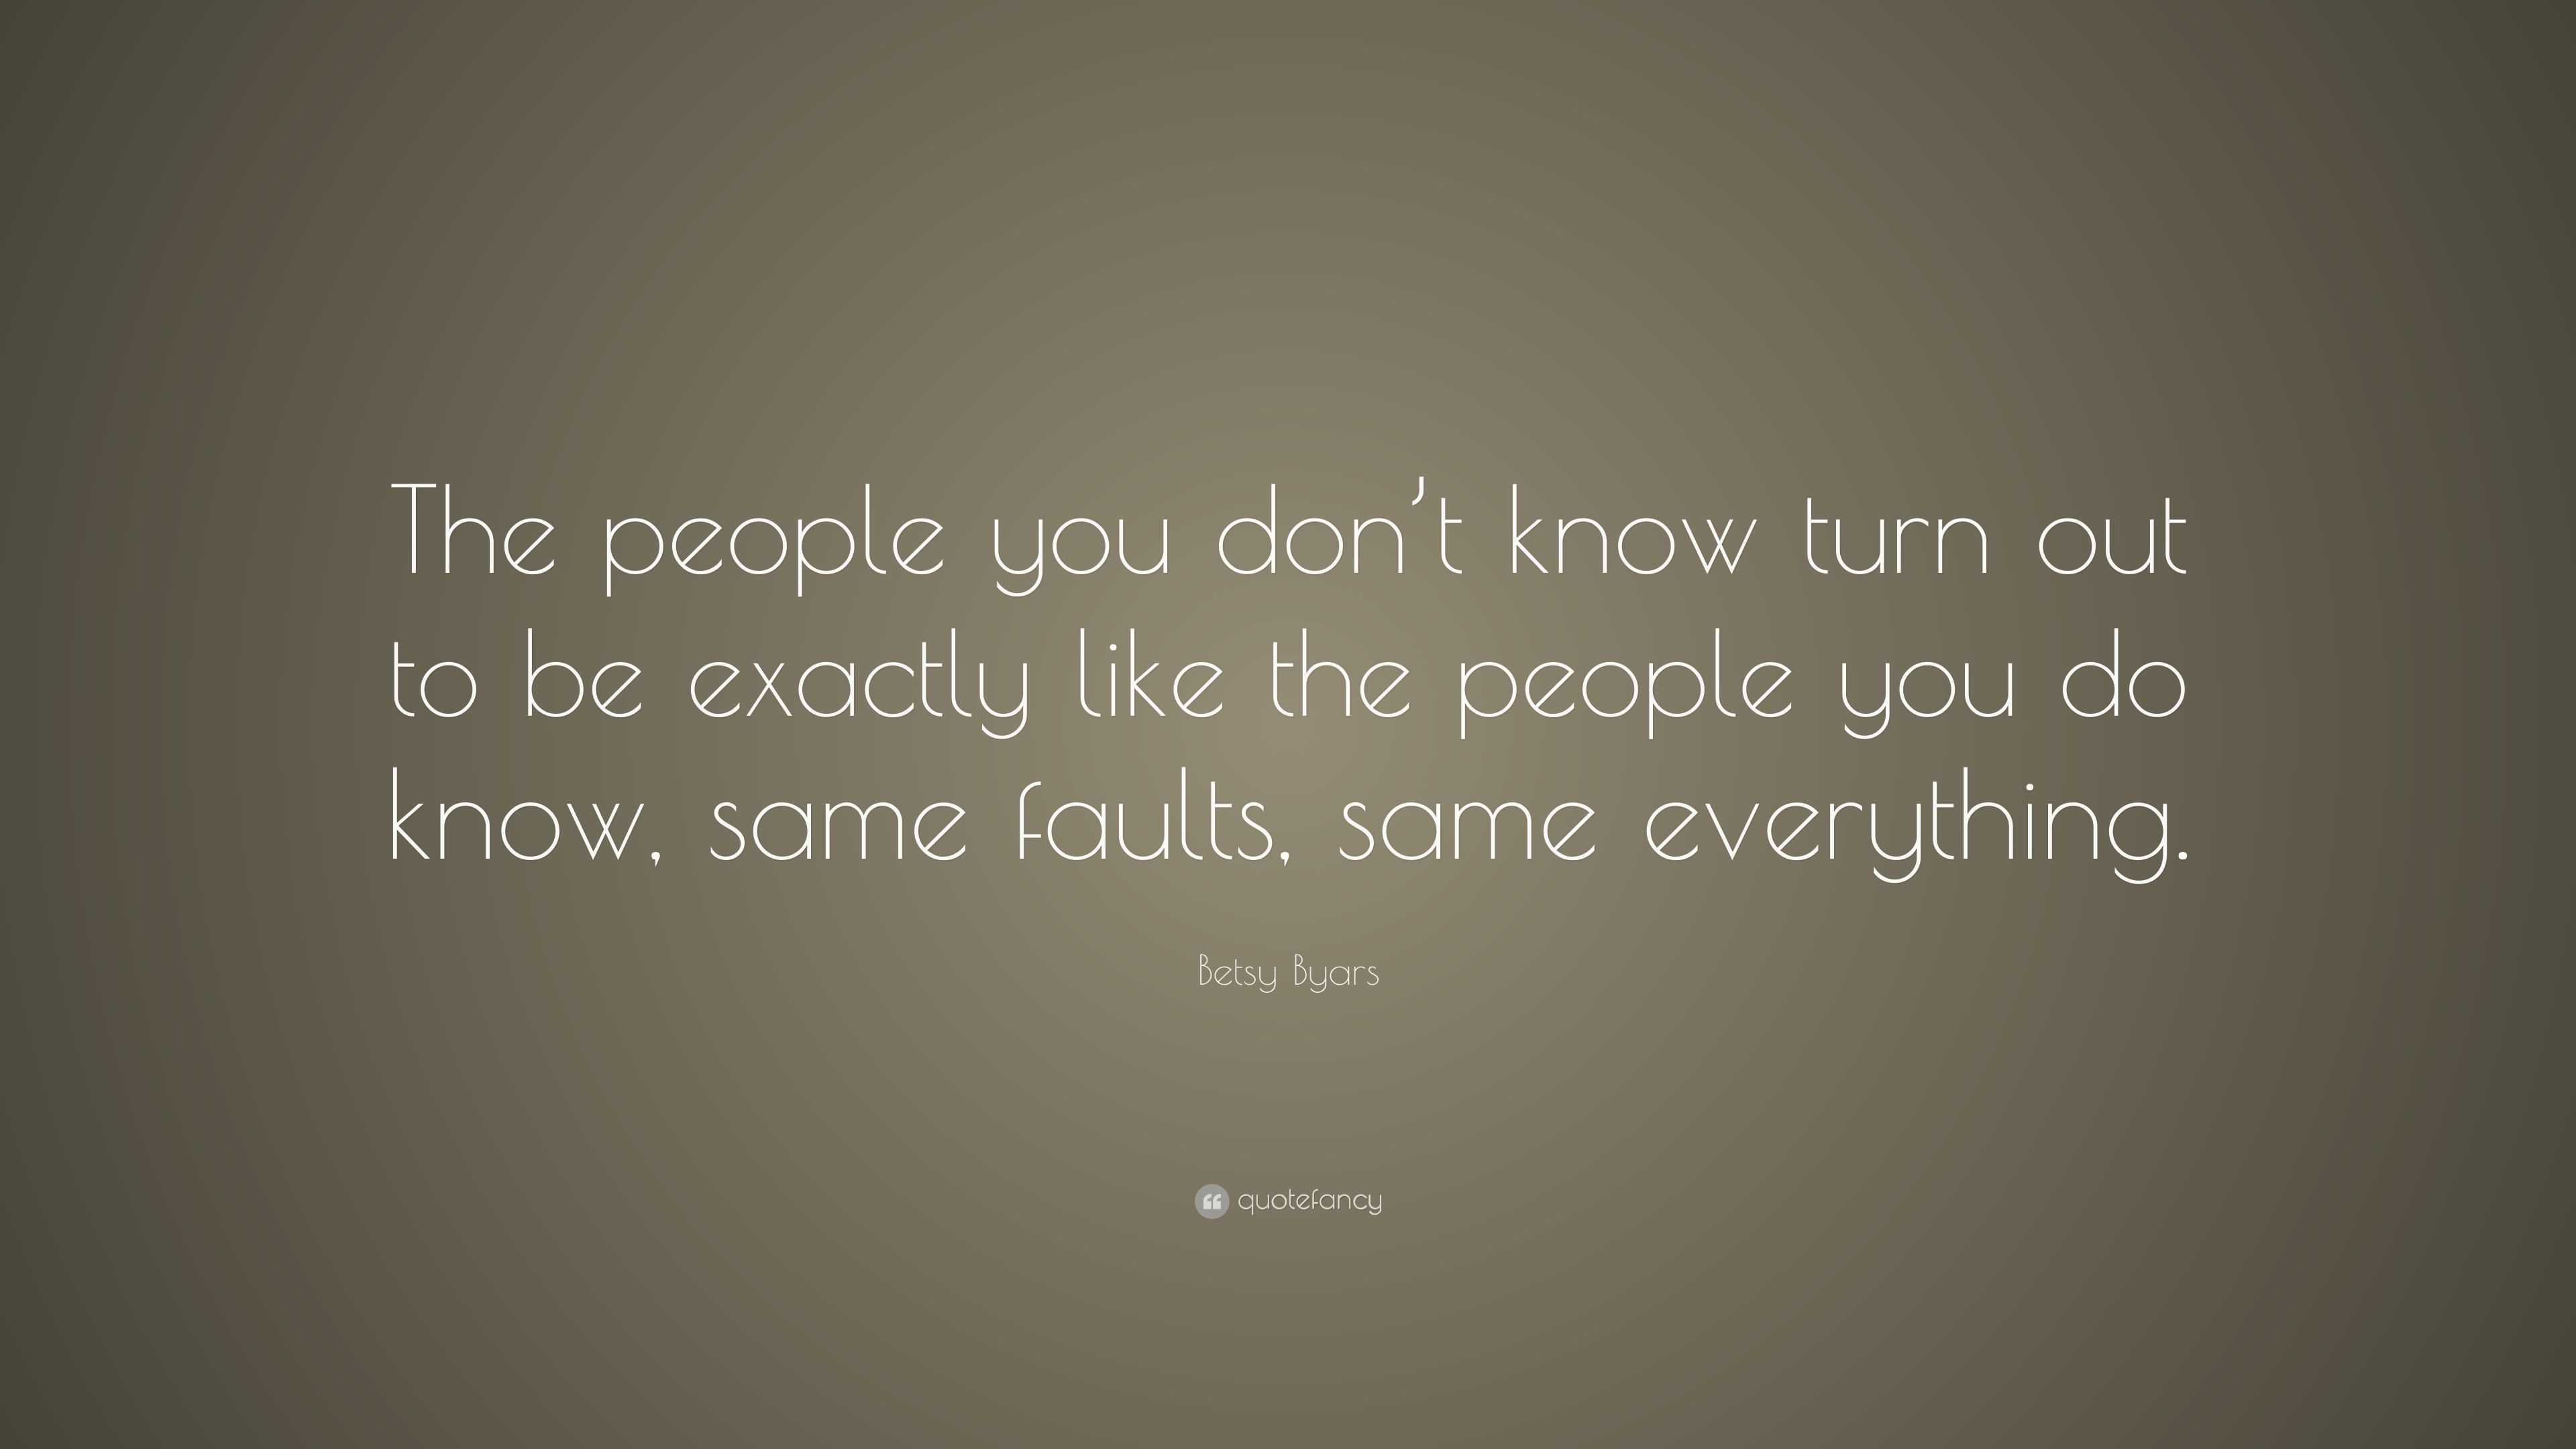 Betsy Byars Quote: “The people you don’t know turn out to be exactly ...